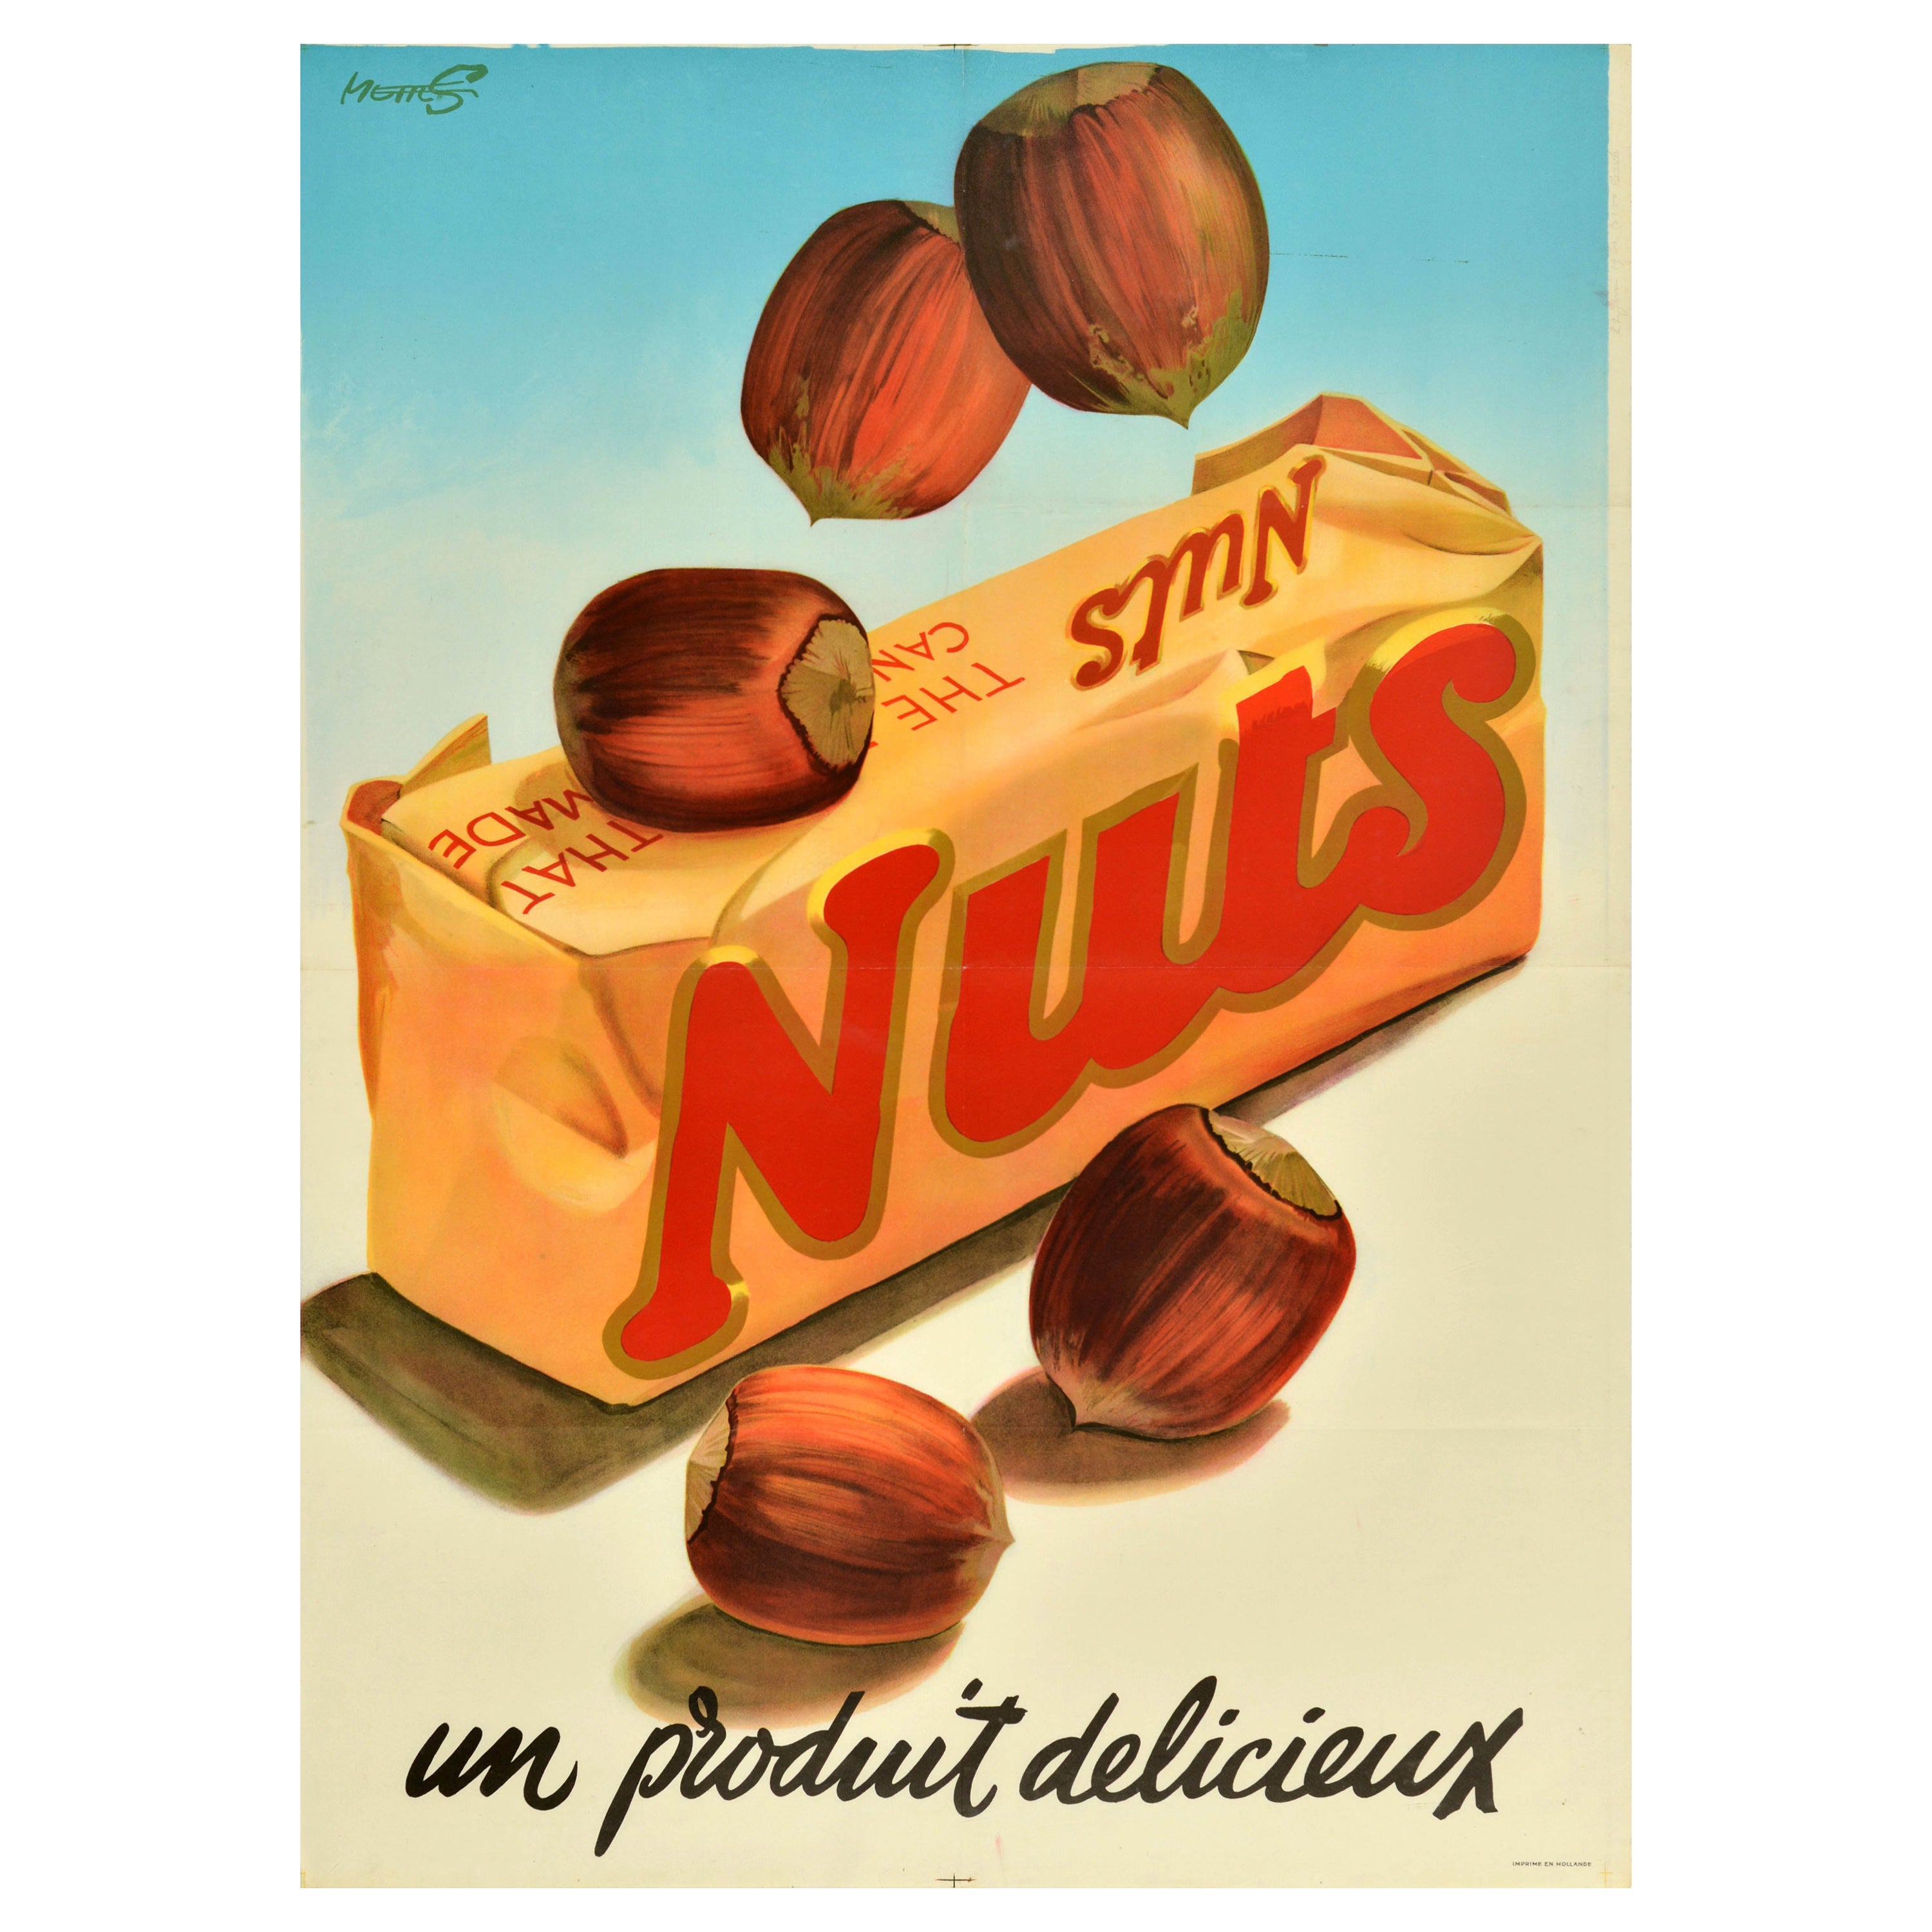 Original Vintage Food Advertising Poster Nuts Chocolate Bar Delicious Product For Sale